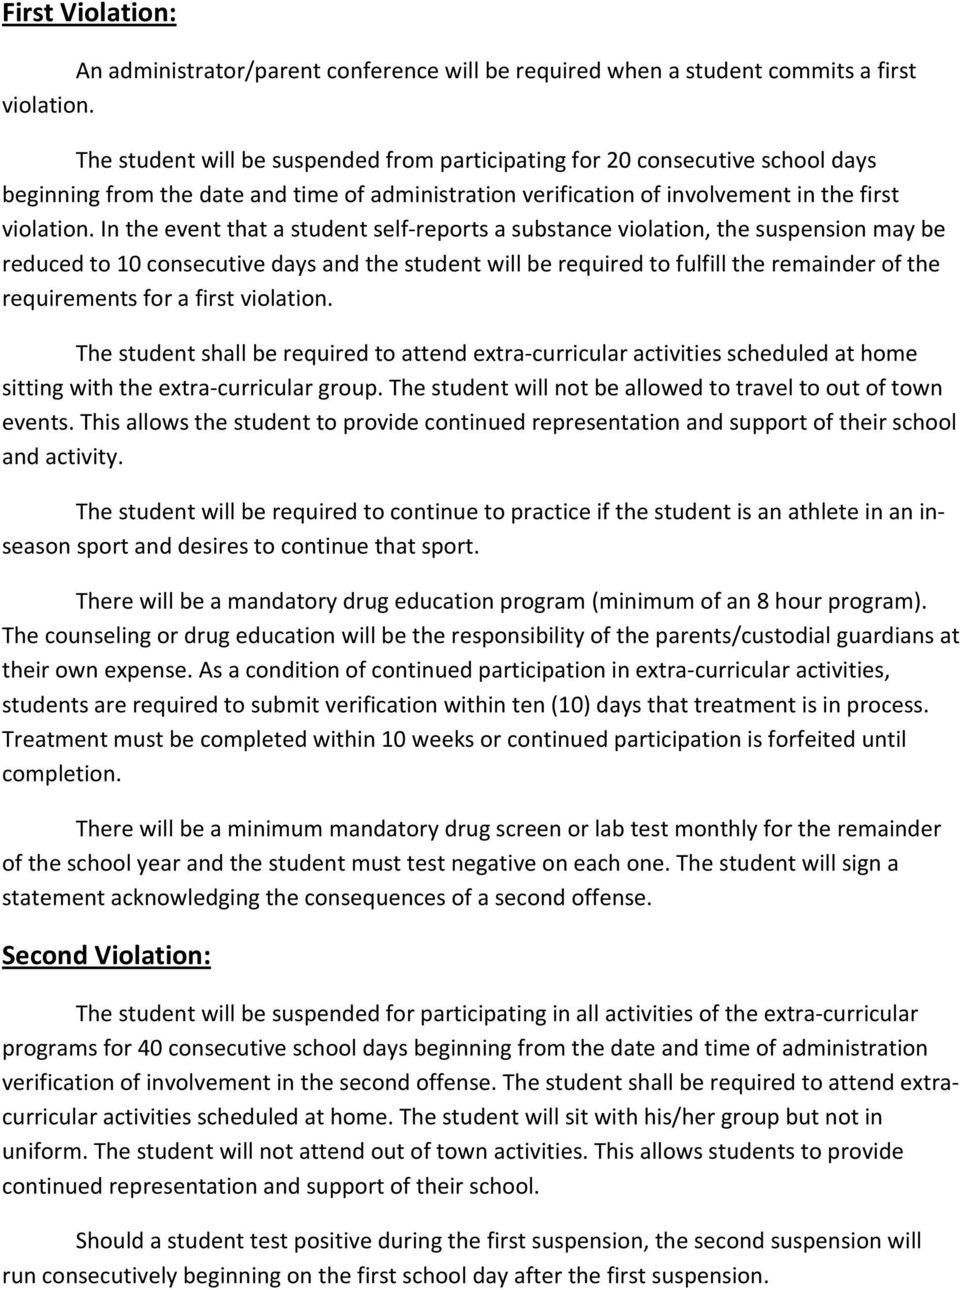 In the event that a student self-reports a substance violation, the suspension may be reduced to 10 consecutive days and the student will be required to fulfill the remainder of the requirements for